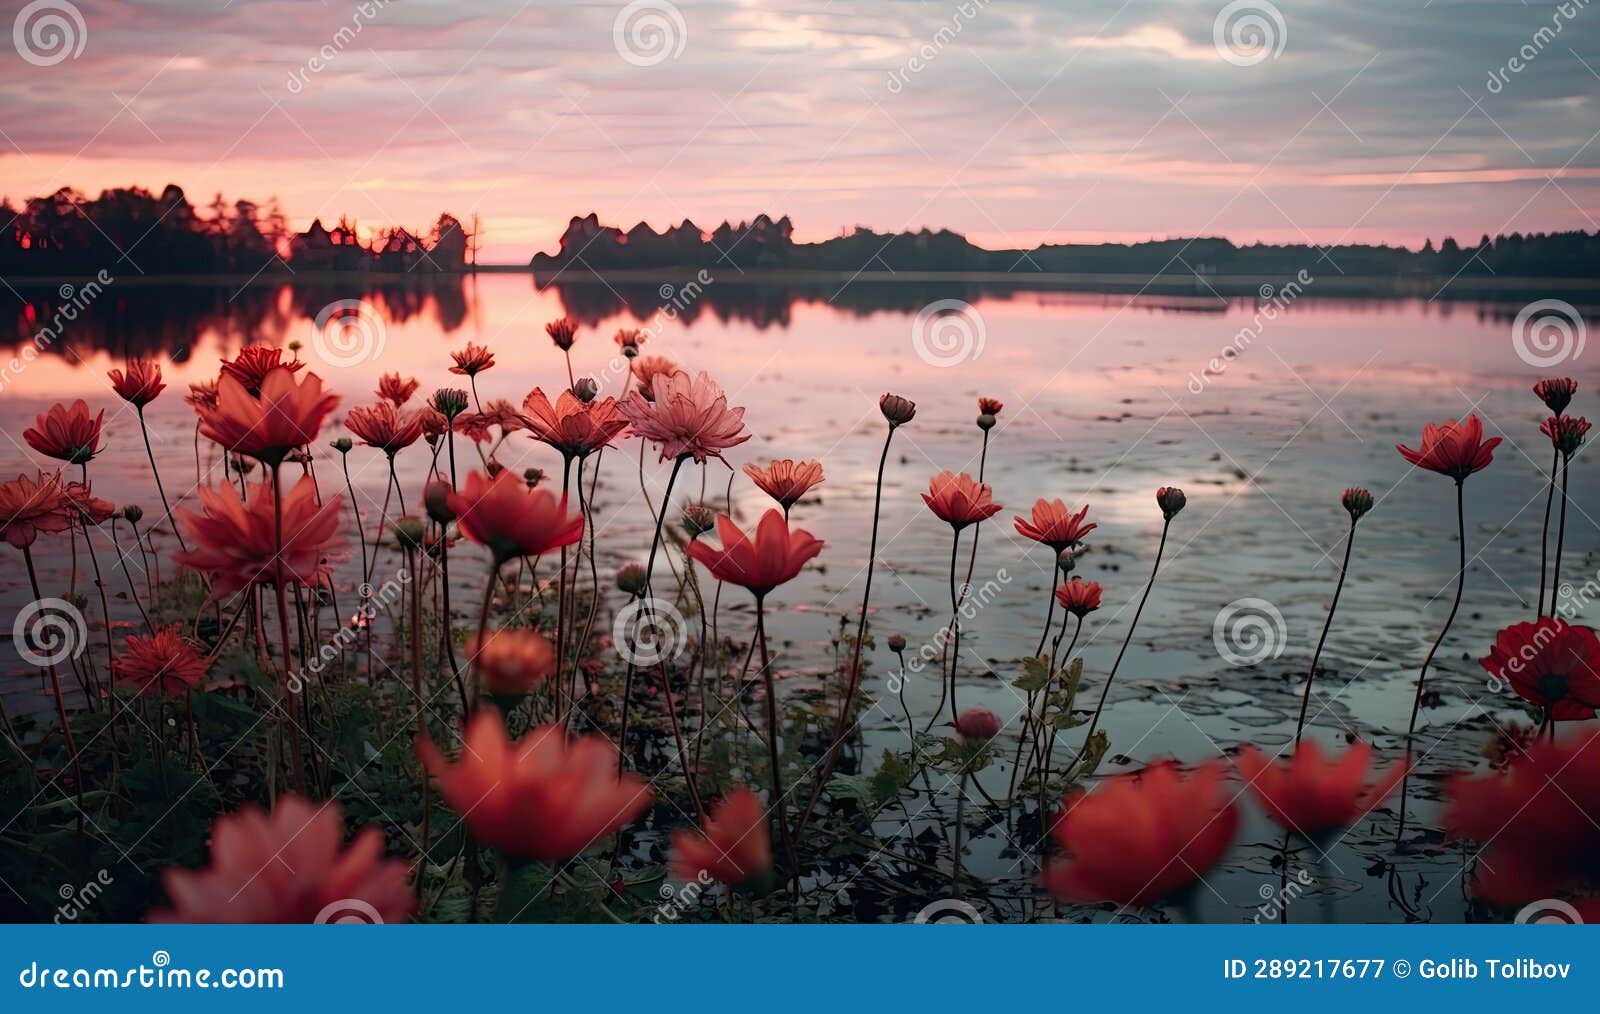 A Field of Cosmos Flowers by a Lake at Sunset Stock Image - Image of ...